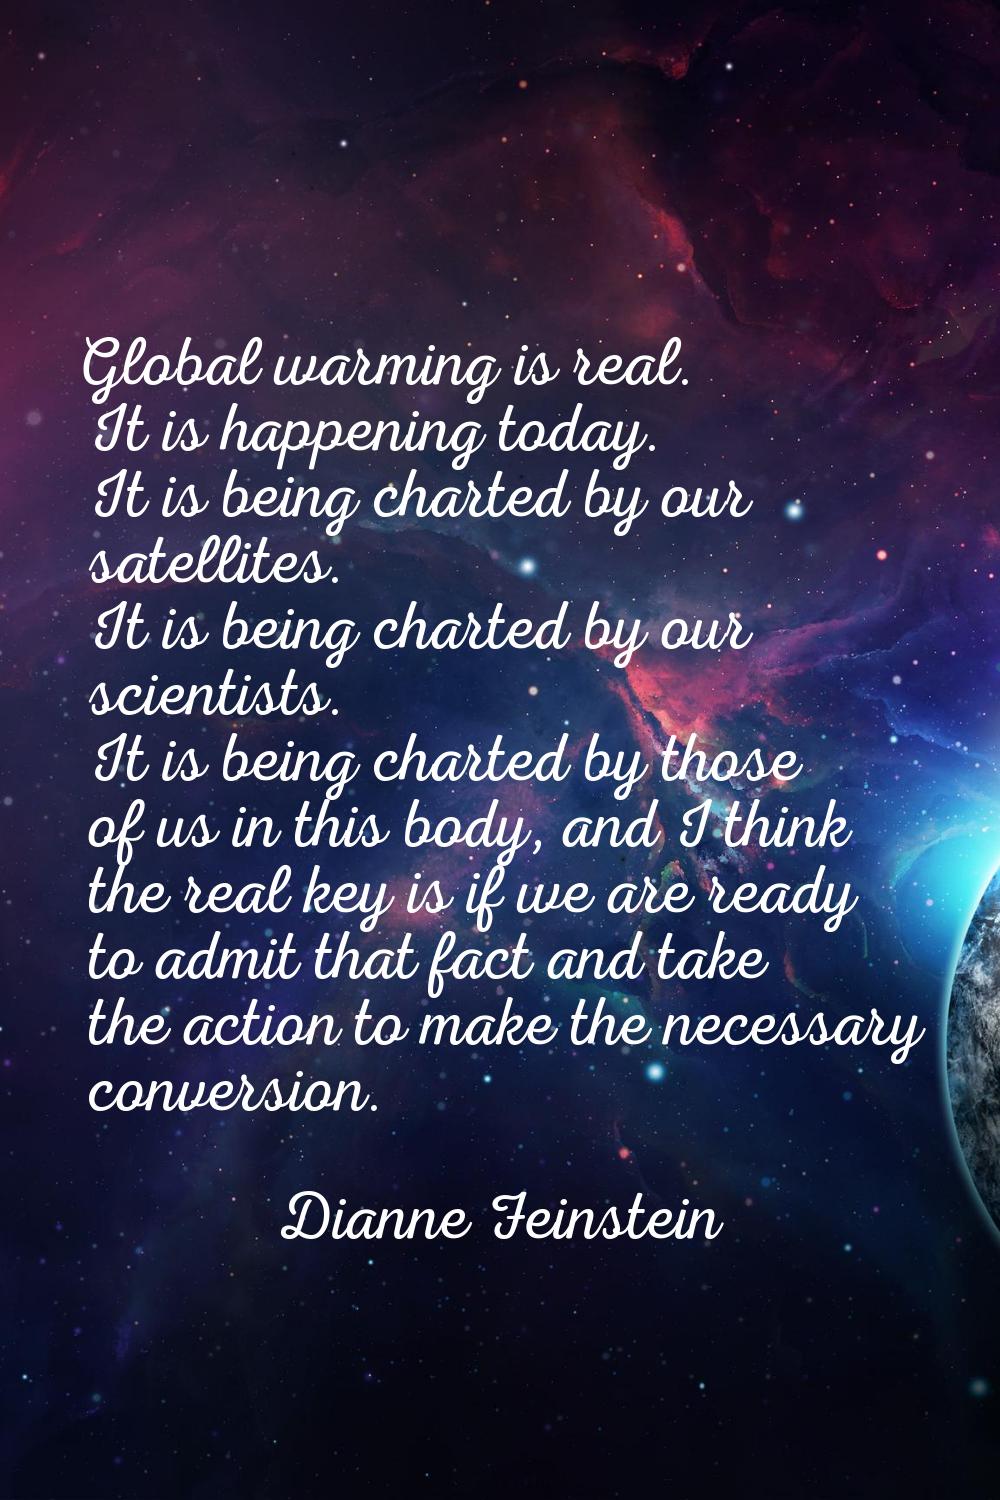 Global warming is real. It is happening today. It is being charted by our satellites. It is being c